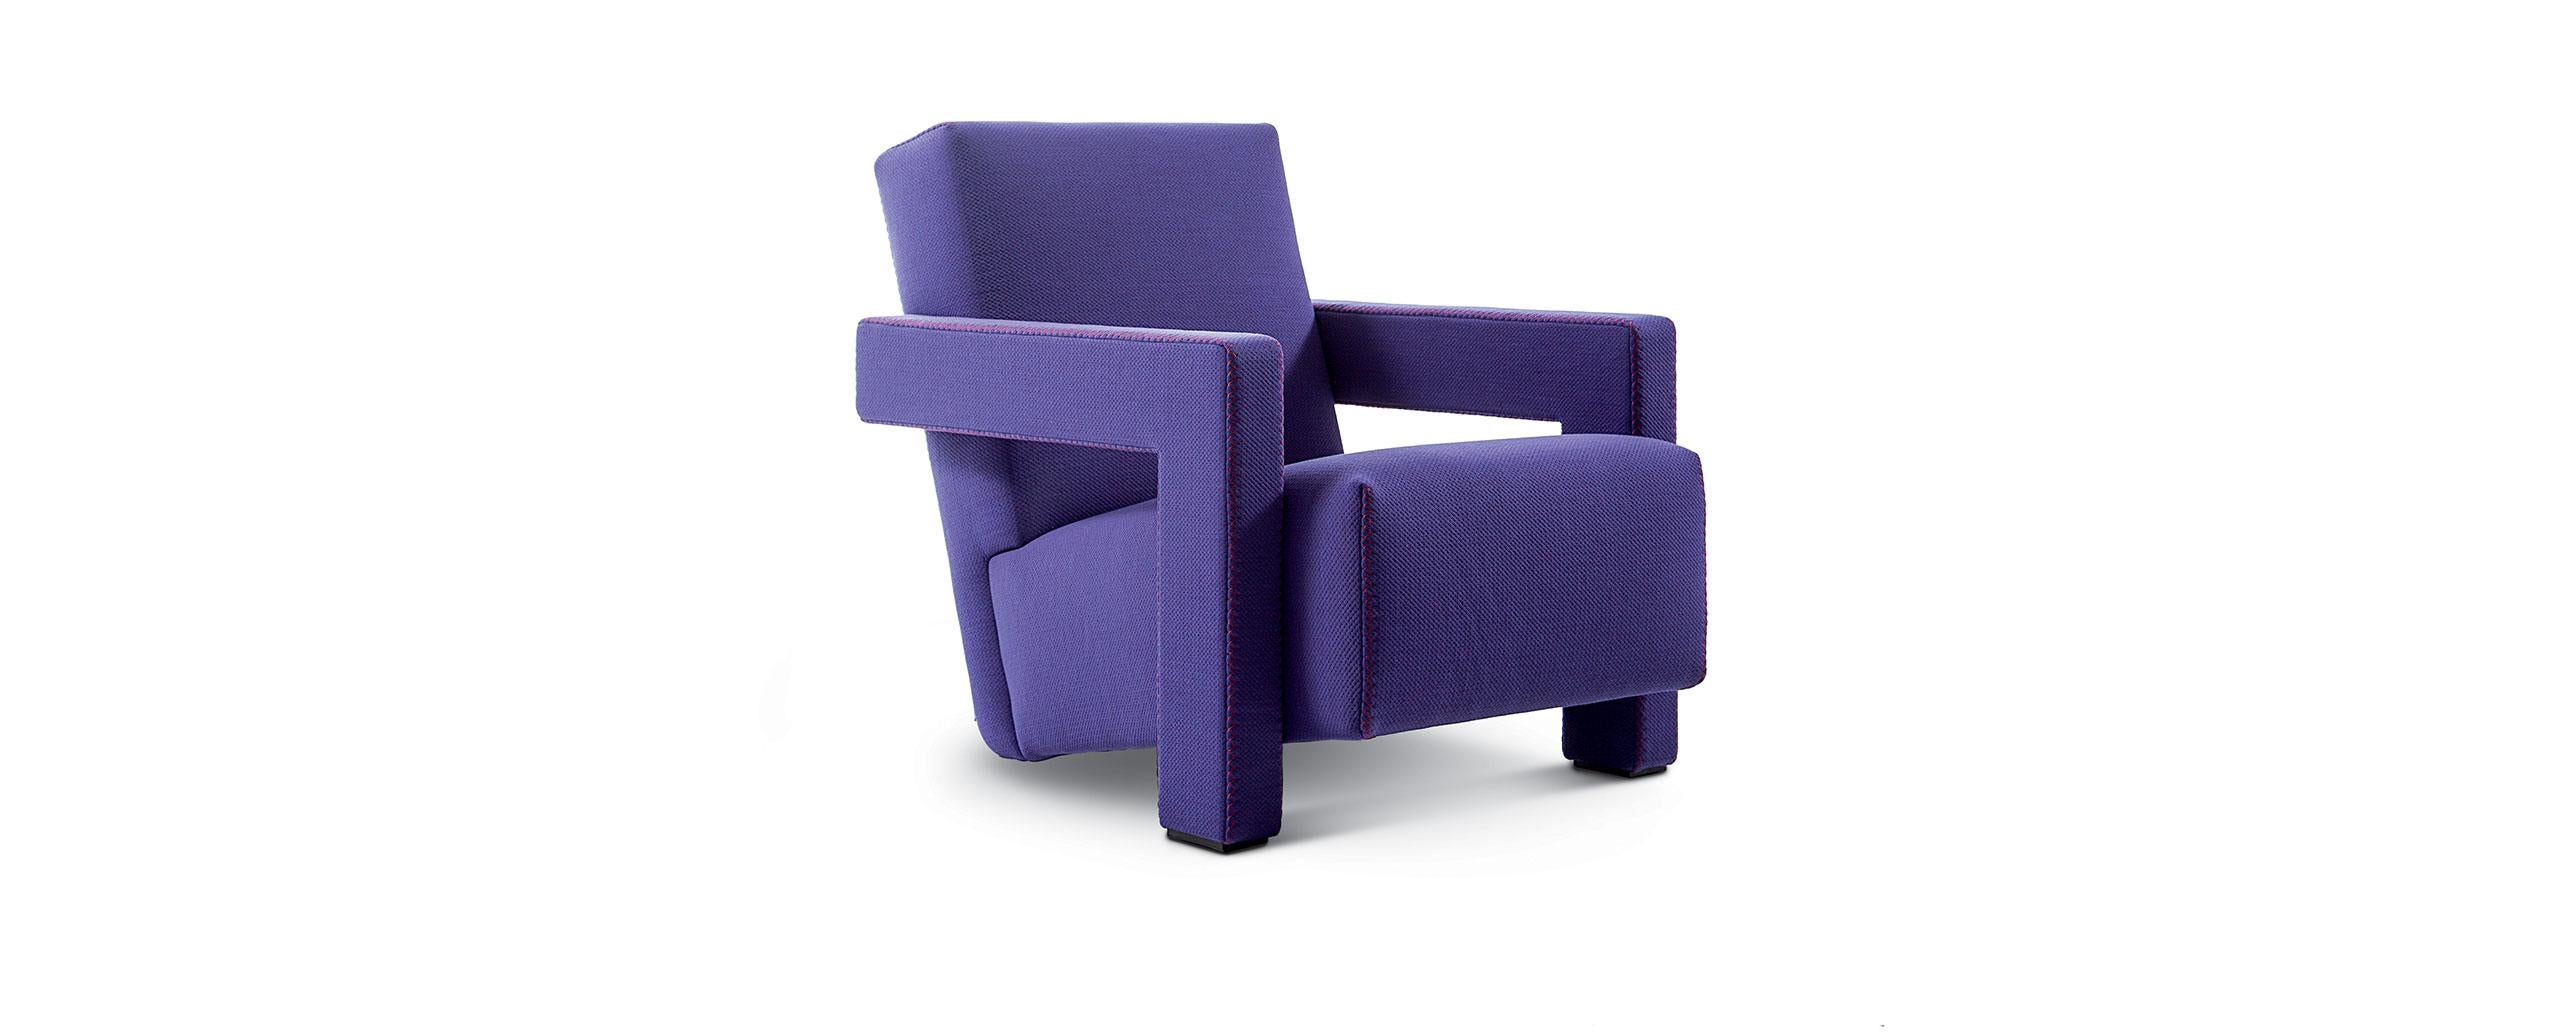 Armchair designed by Gerrit Thomas Rietveld in 1935. Relaunched in 2015.
Manufactured by Cassina in Italy.

Gerrit T. Rietveld came up with the design for the Utrecht armchair in 1935 while working for the Metz & Co. department store in Amsterdam,